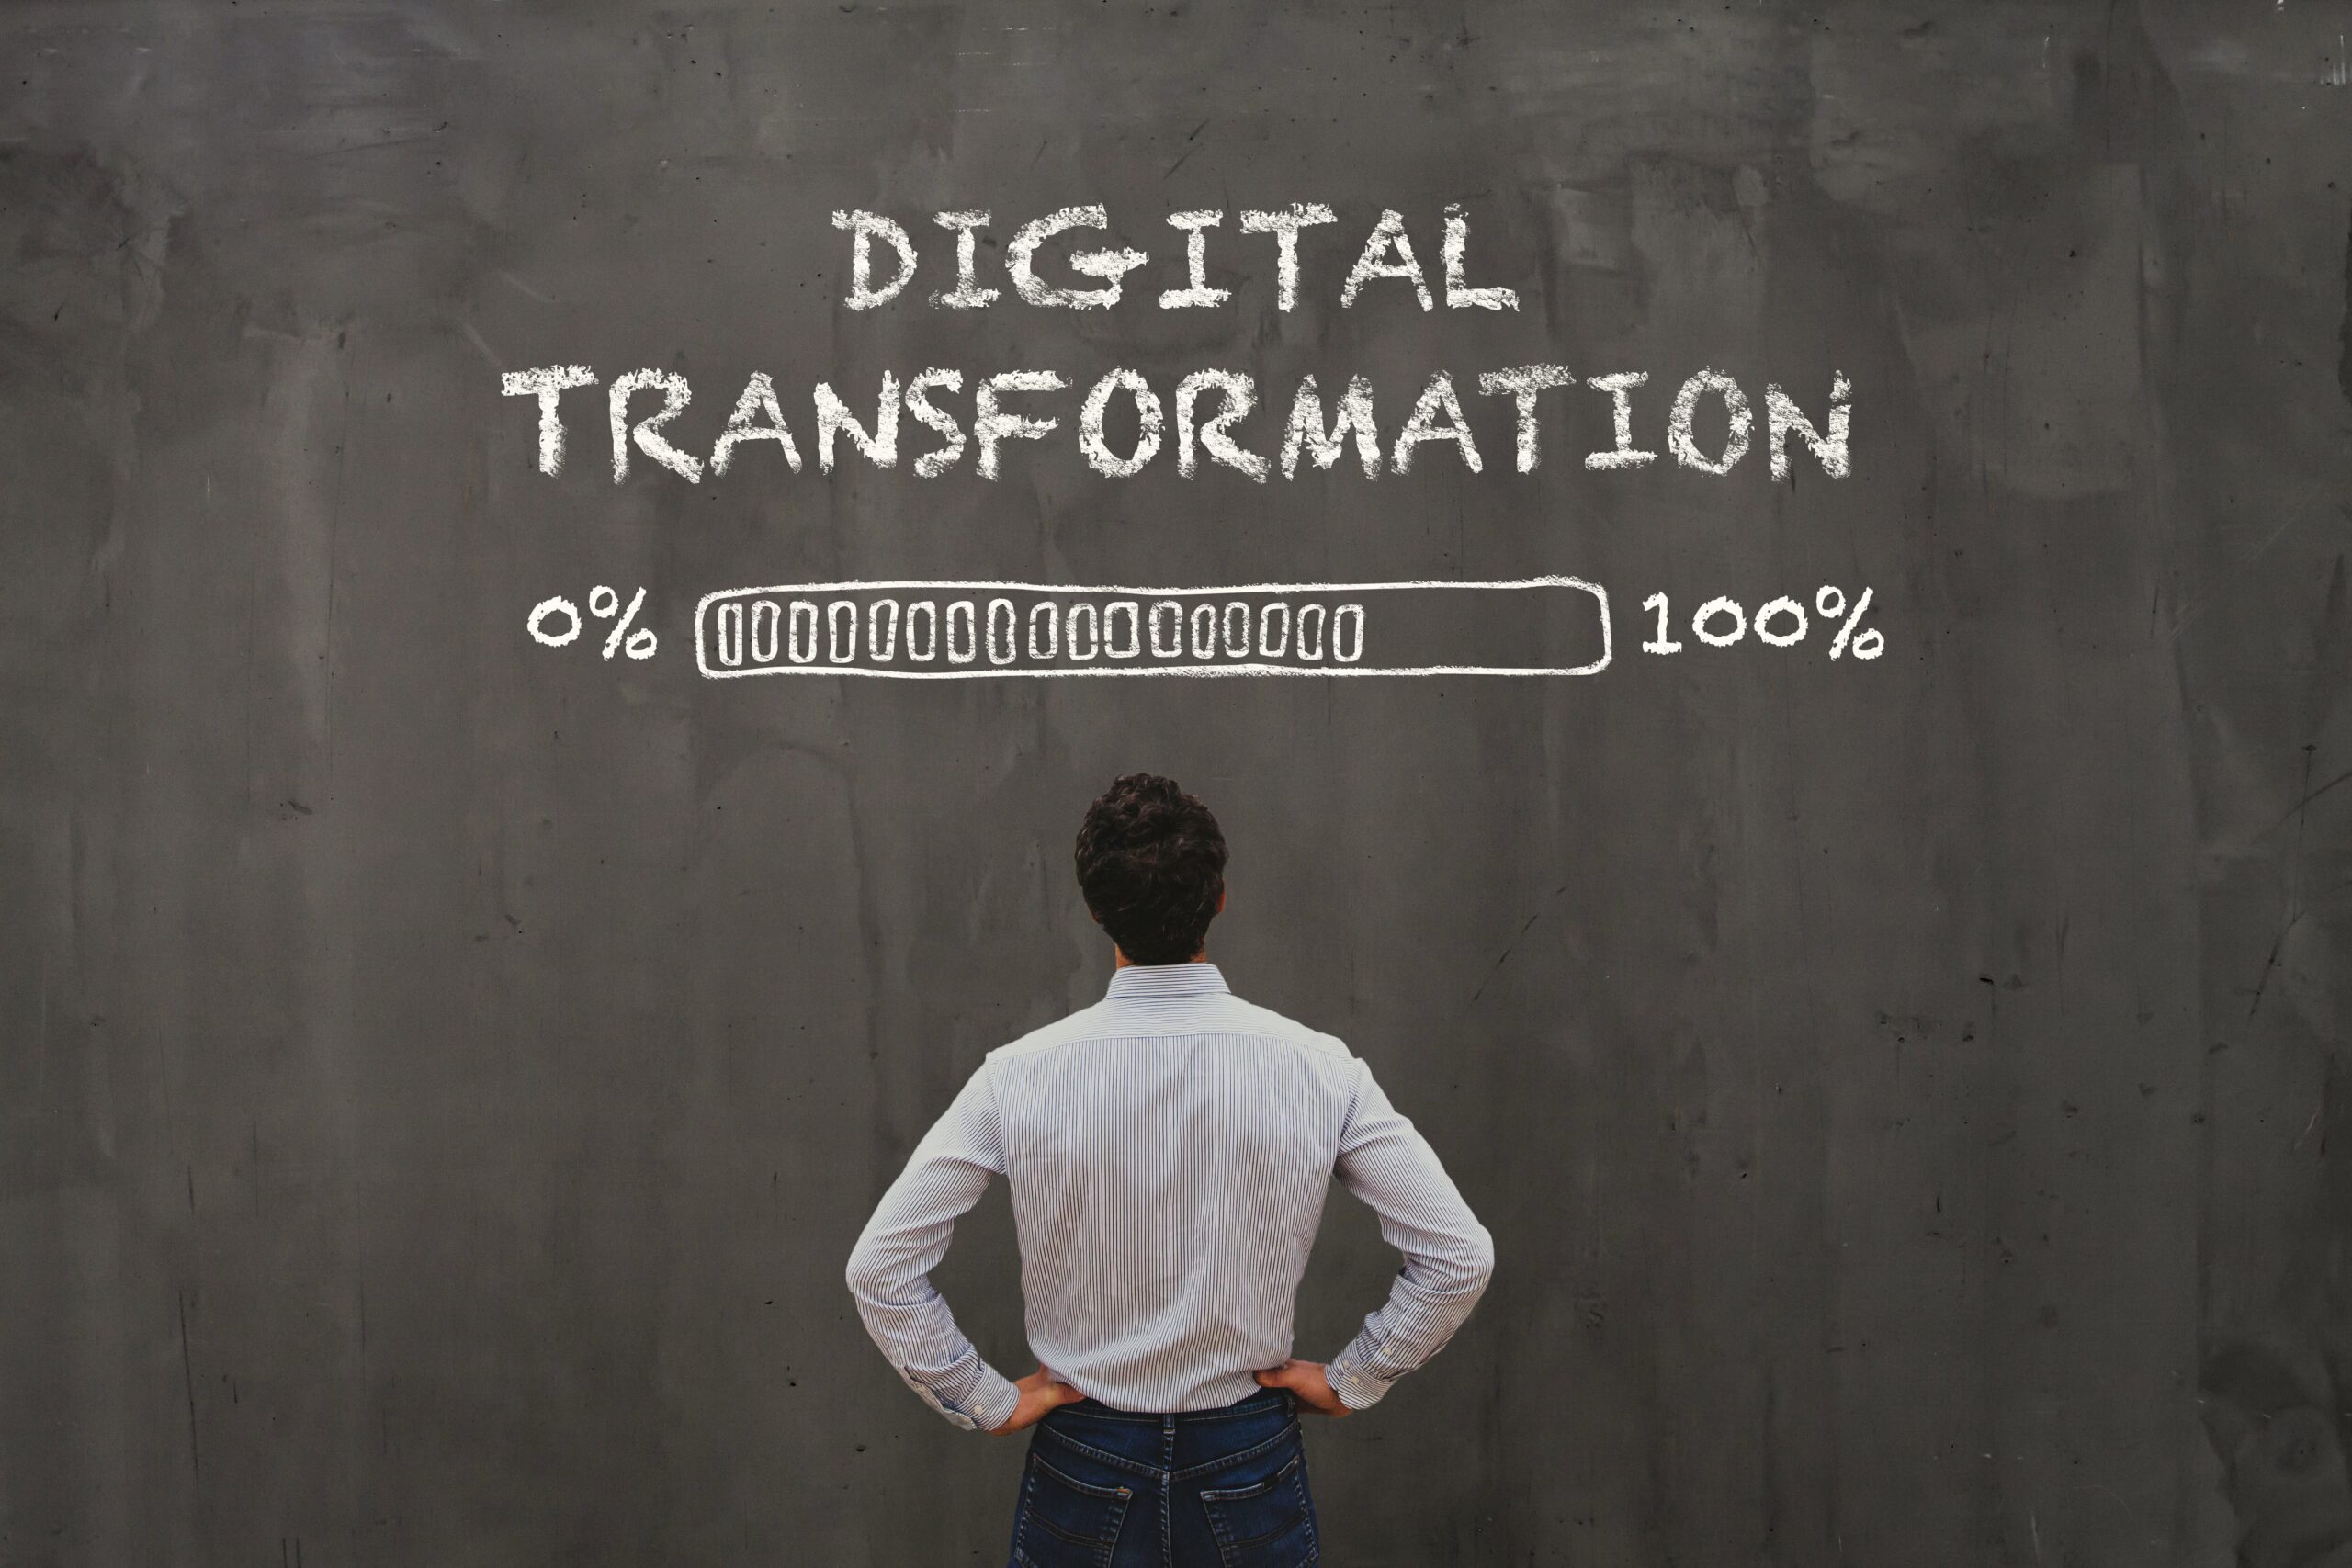 Cover image for the content on "10 mistakes in digital transformation and how to avoid them," featuring a man facing a sort of board with "digital transformation" written on it, accompanied by a progress bar loading from 0% to 100%